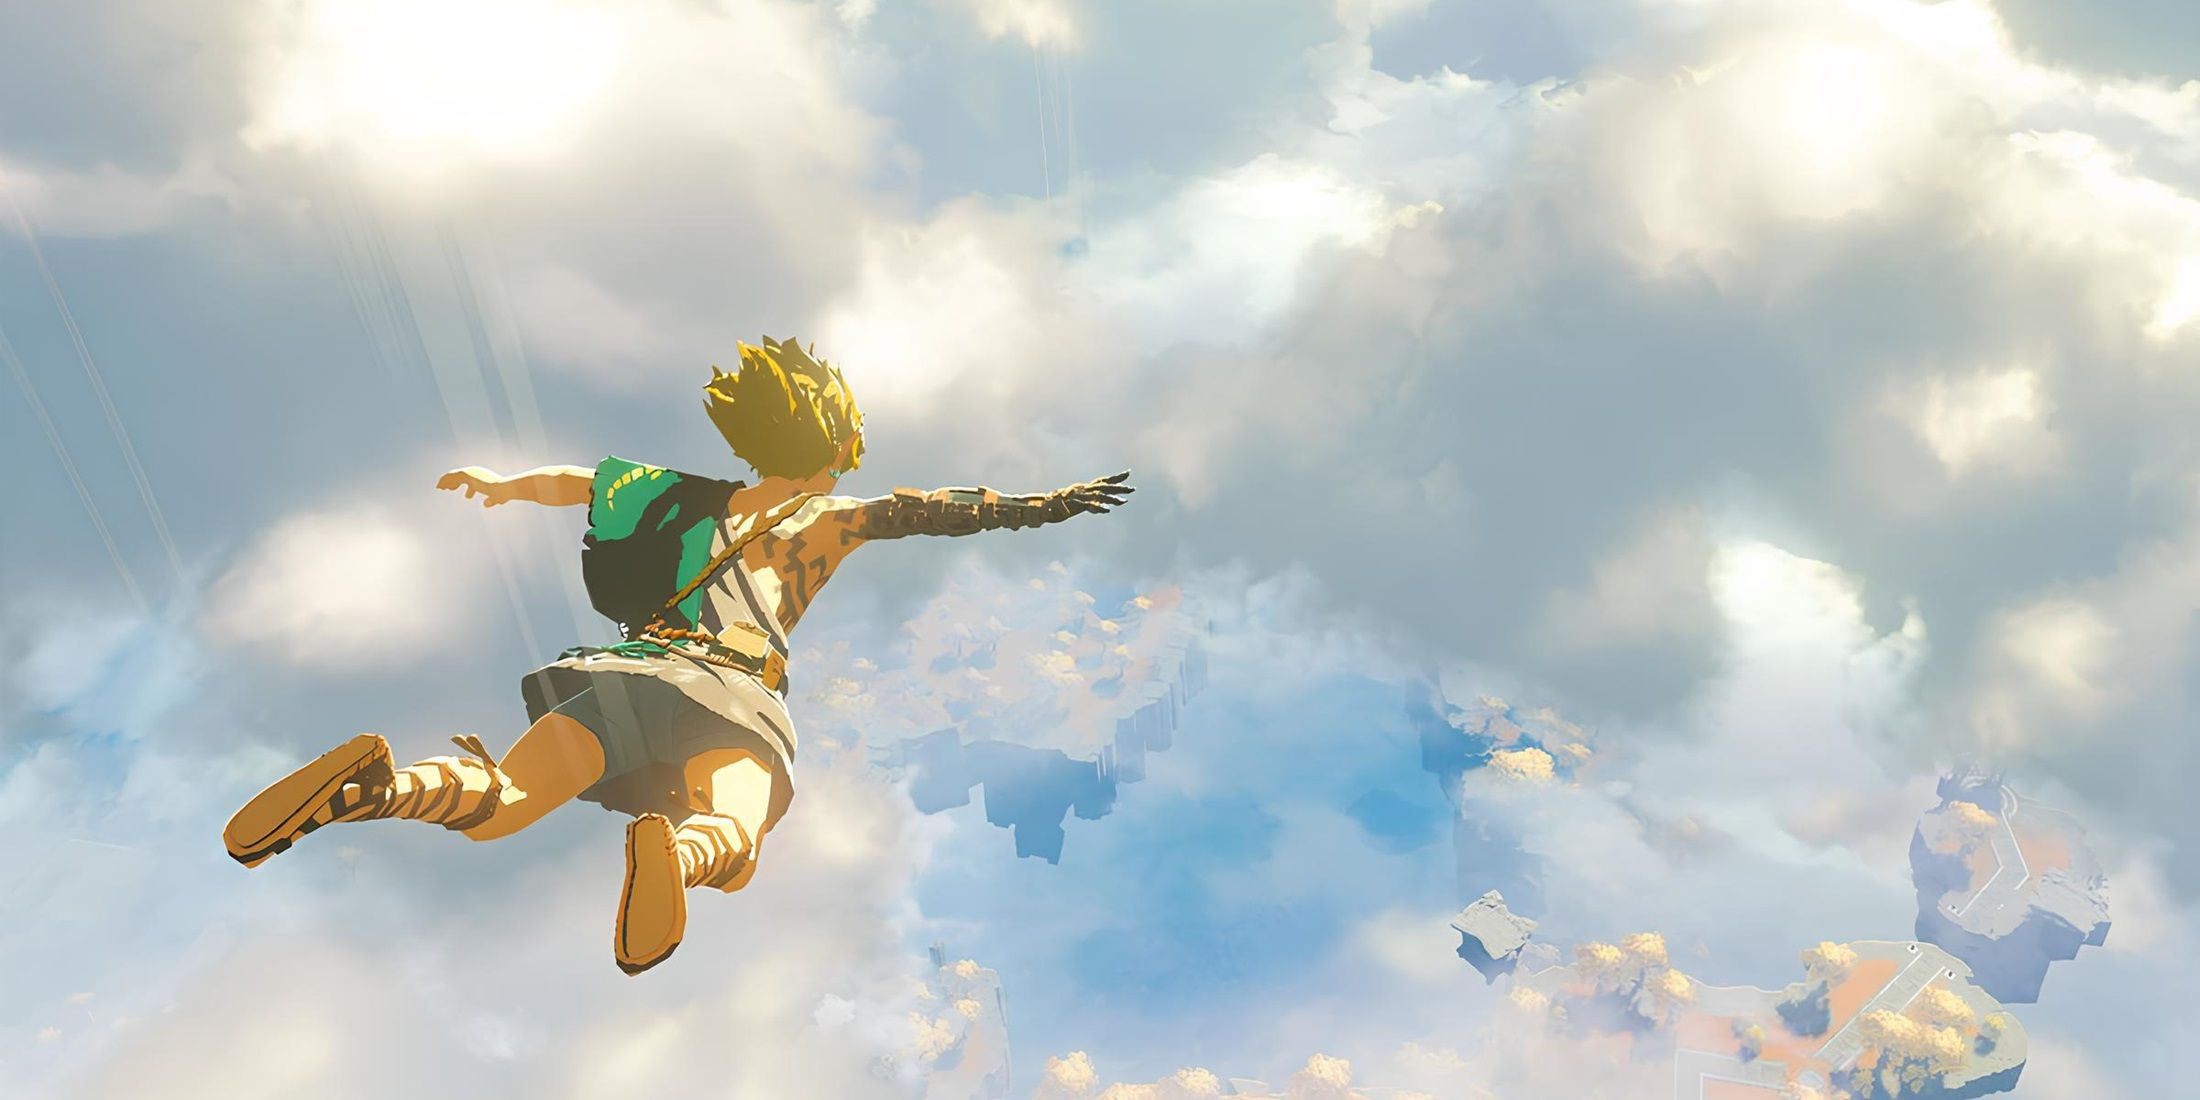 zelda-tears-of-the-kingdom-builds-incredible-biplane-in-the-game